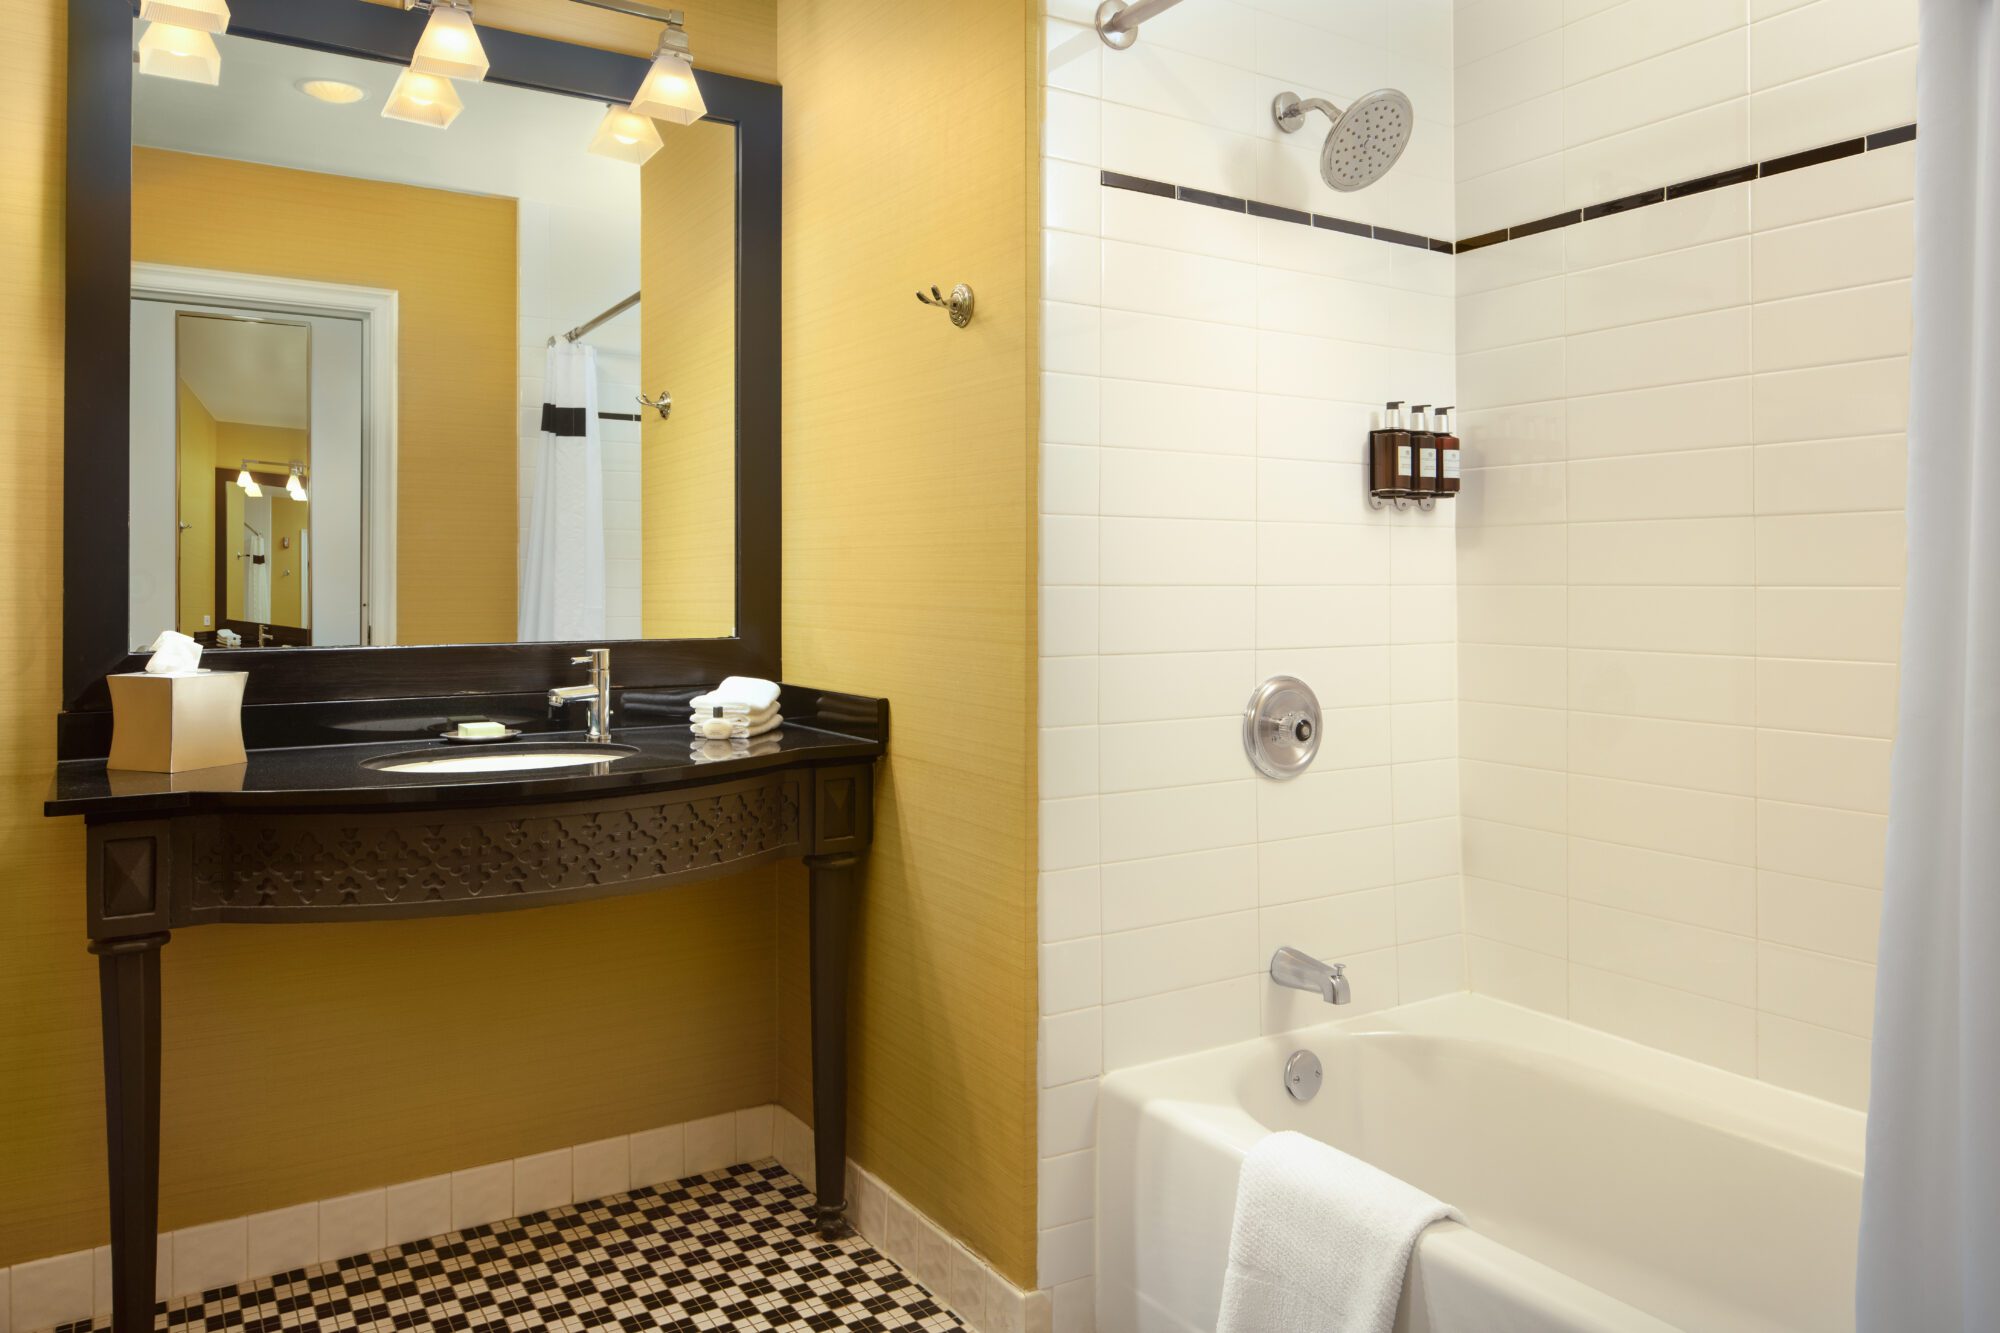 Bathroom with yellow walls and bathtub in front of mirror at Hotel Chicago Downtown, Autograph Collection